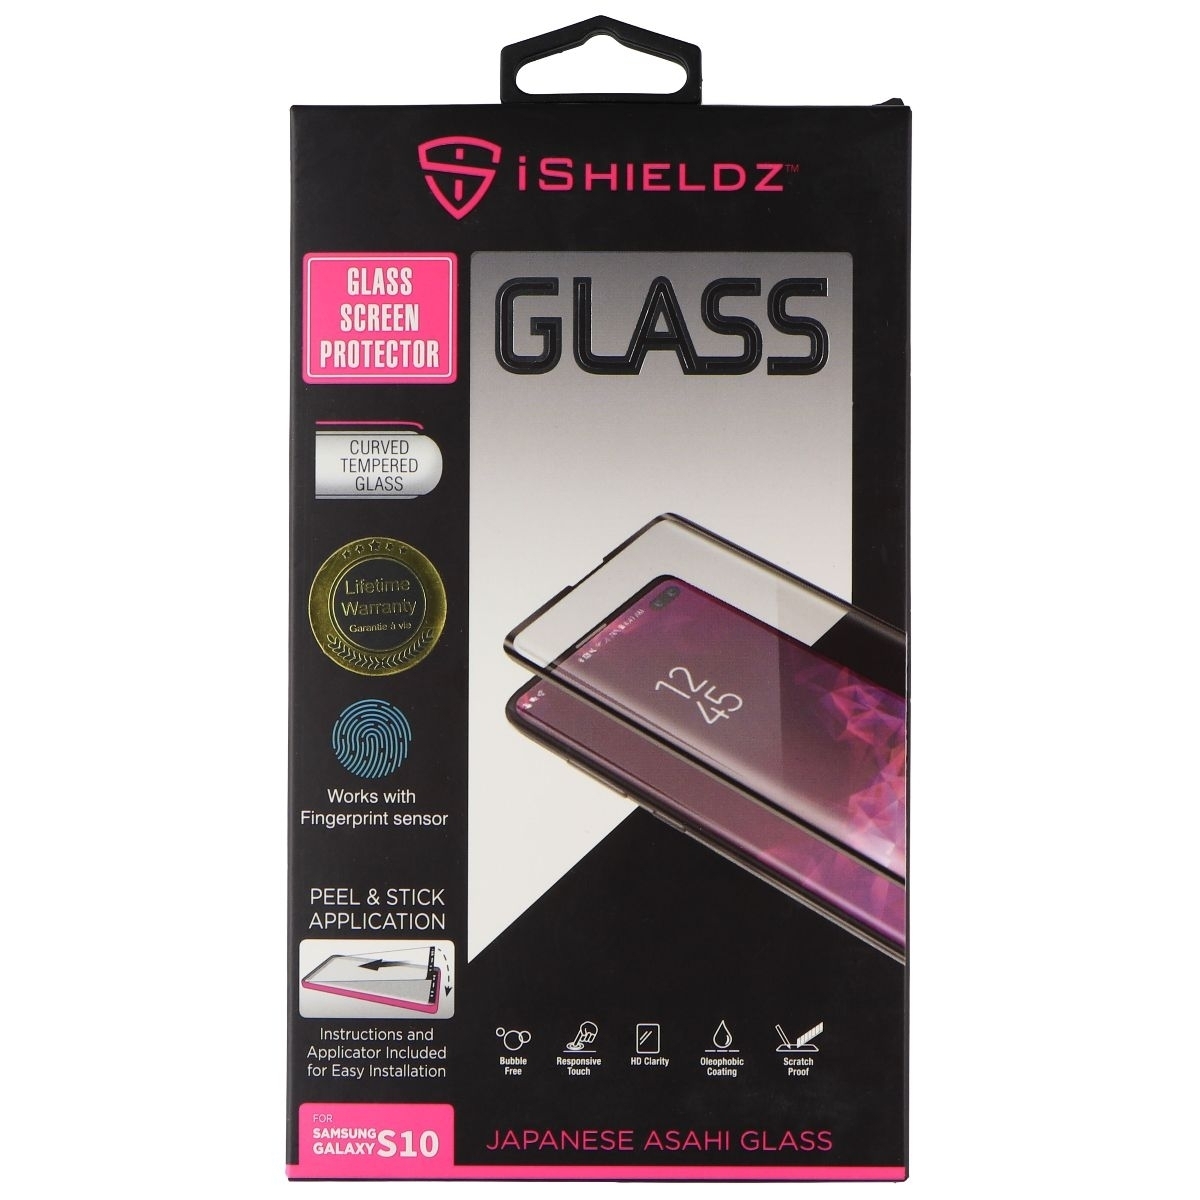 IShieldz Tempered Glass Screen Protector For Samsung Galaxy S10 - Clear (Refurbished)